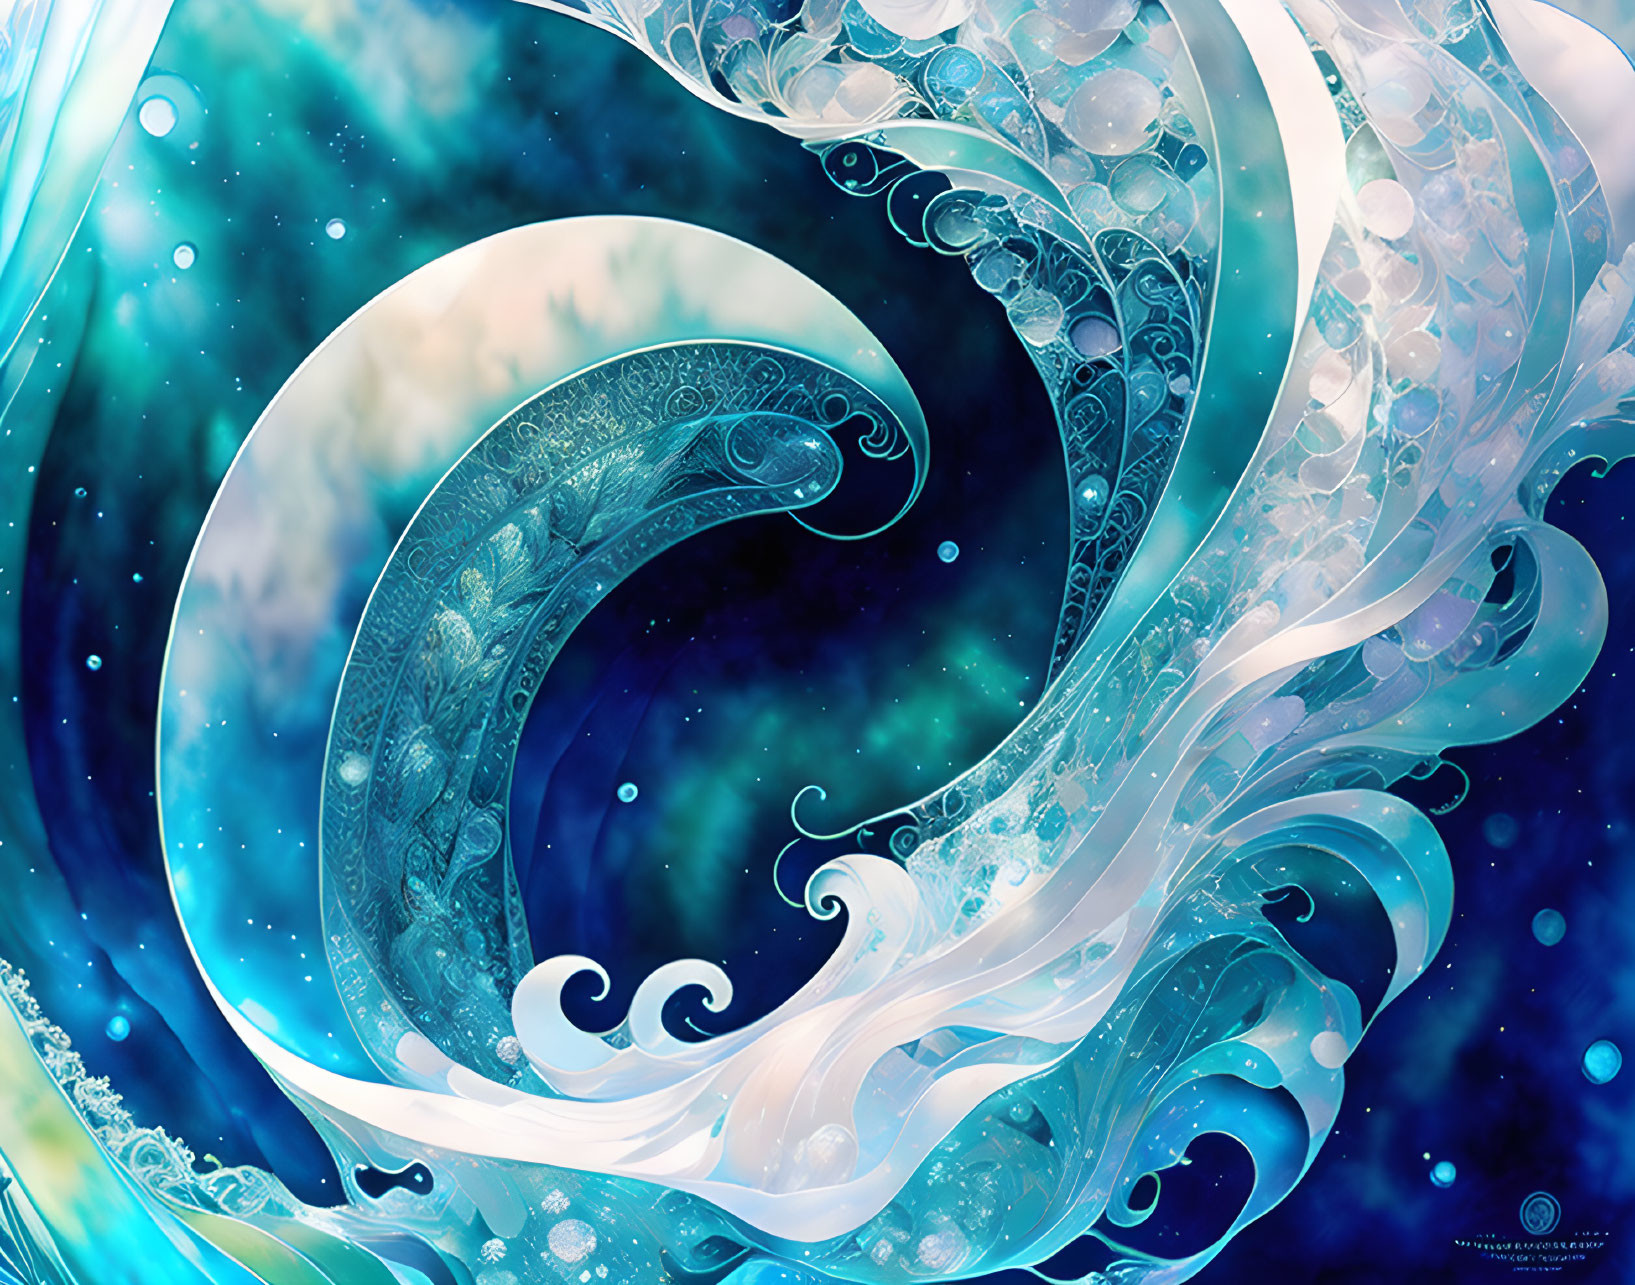 Abstract Ocean Waves Fractal Art in Blue and White